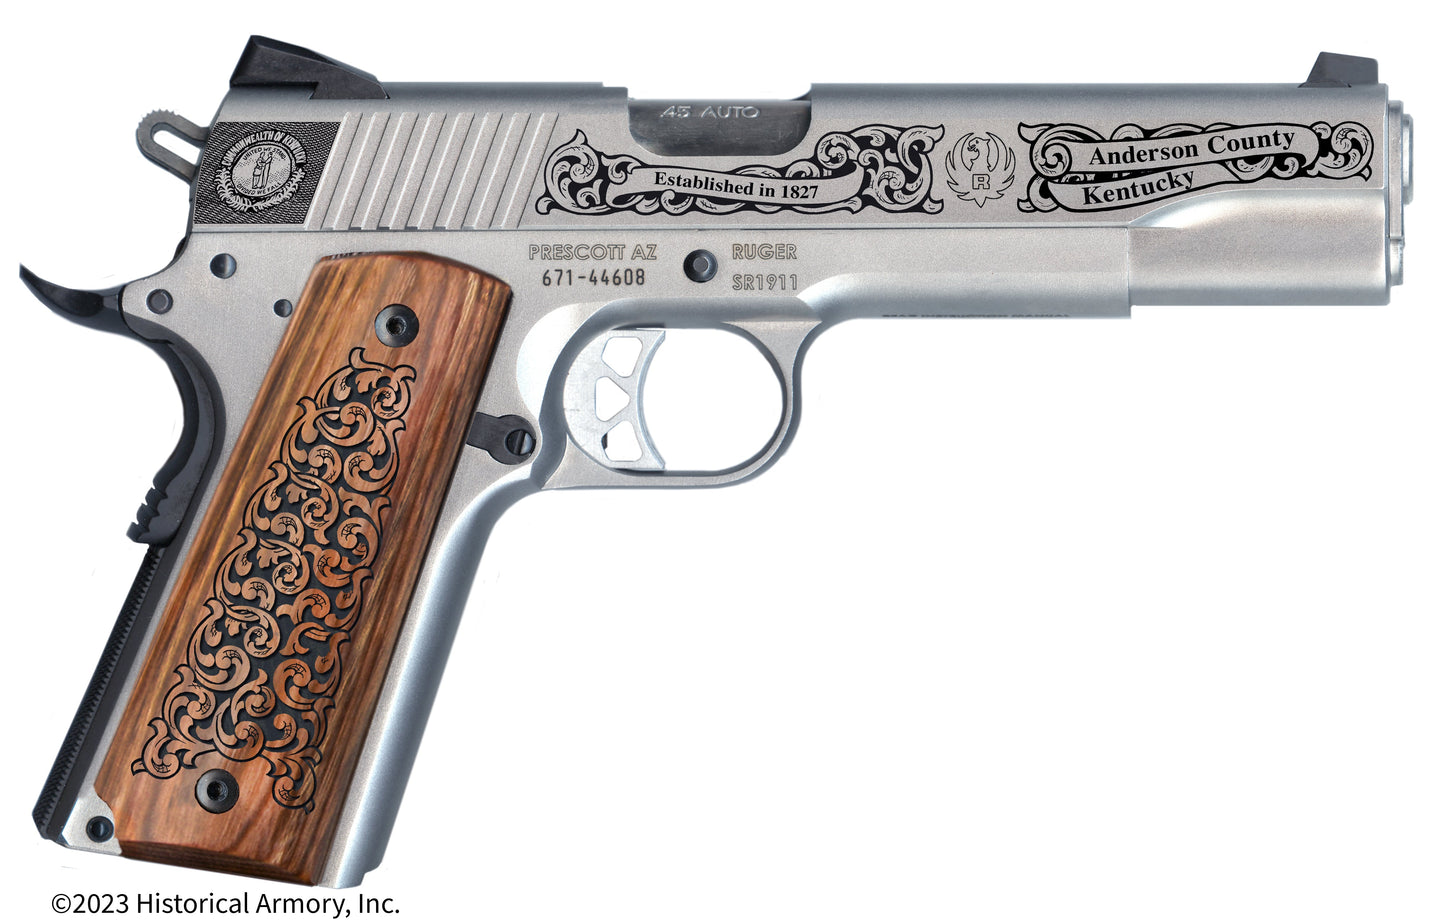 Anderson County Kentucky Engraved .45 Auto Ruger 1911